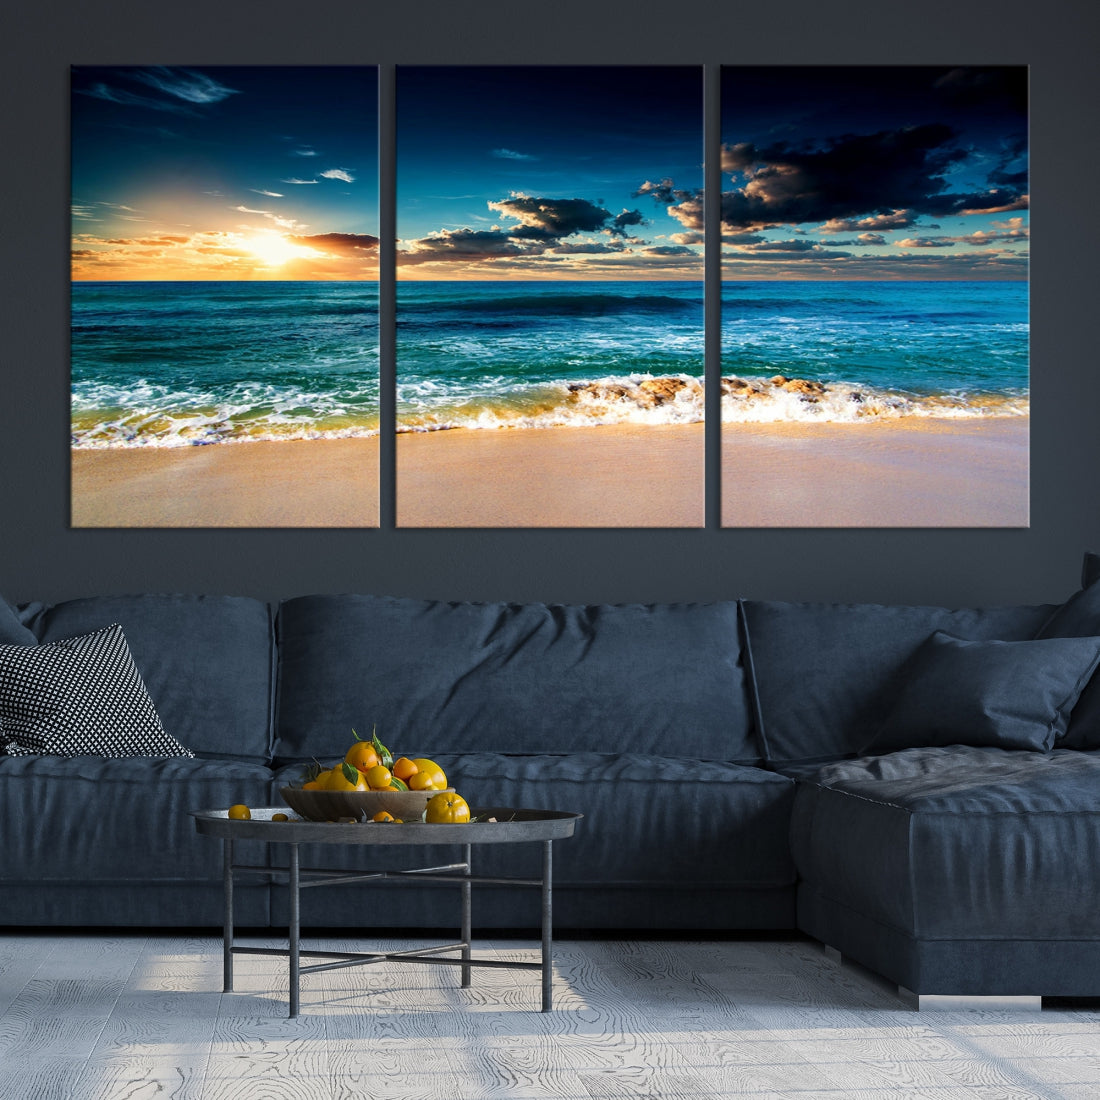 Blue Sunset Seascape View Wall Art Canvas Print for Living Room Office Home Decor